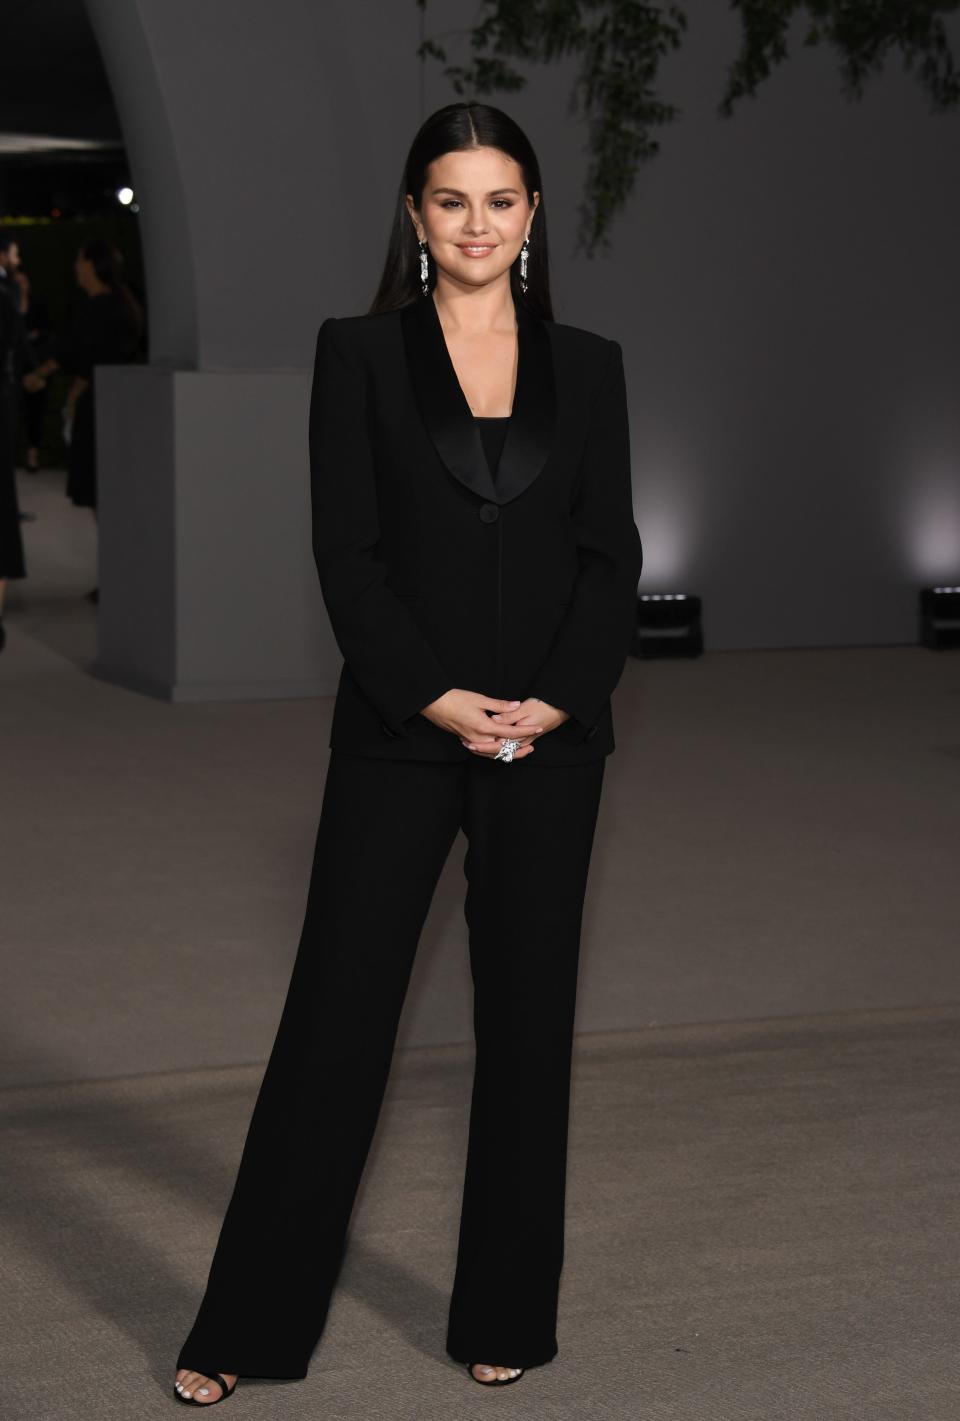 Selena Gomez attends the Academy Museum Gala in LA on October 15, 2022.